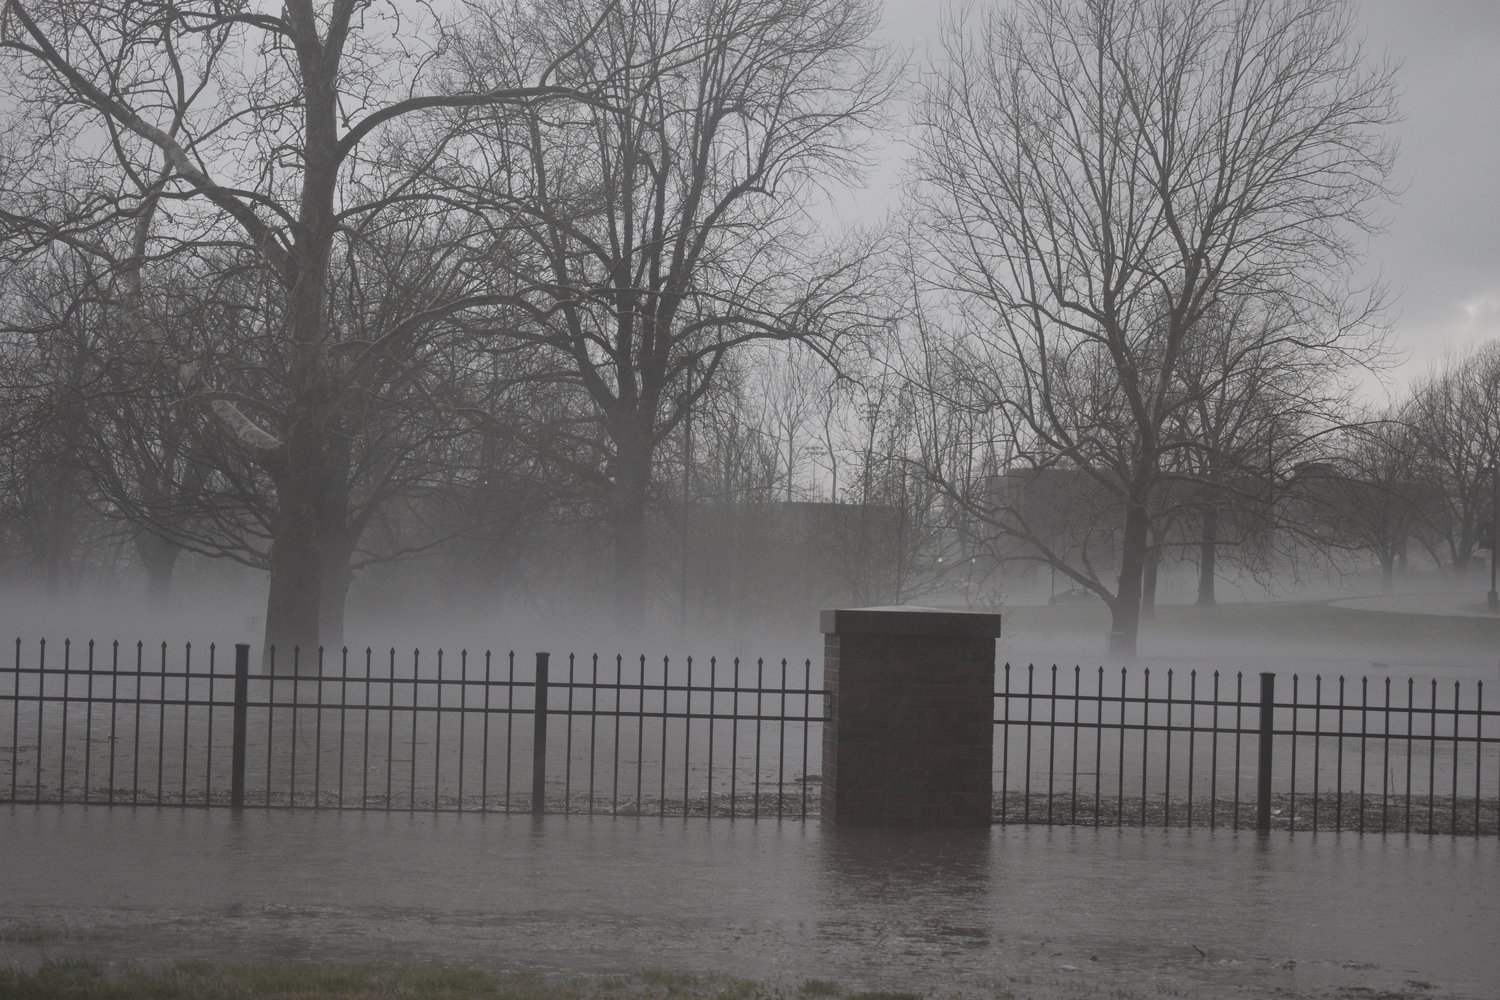 Fog rises from the flood waters filling the southeast corner of Southwest Baptist University’s campus.